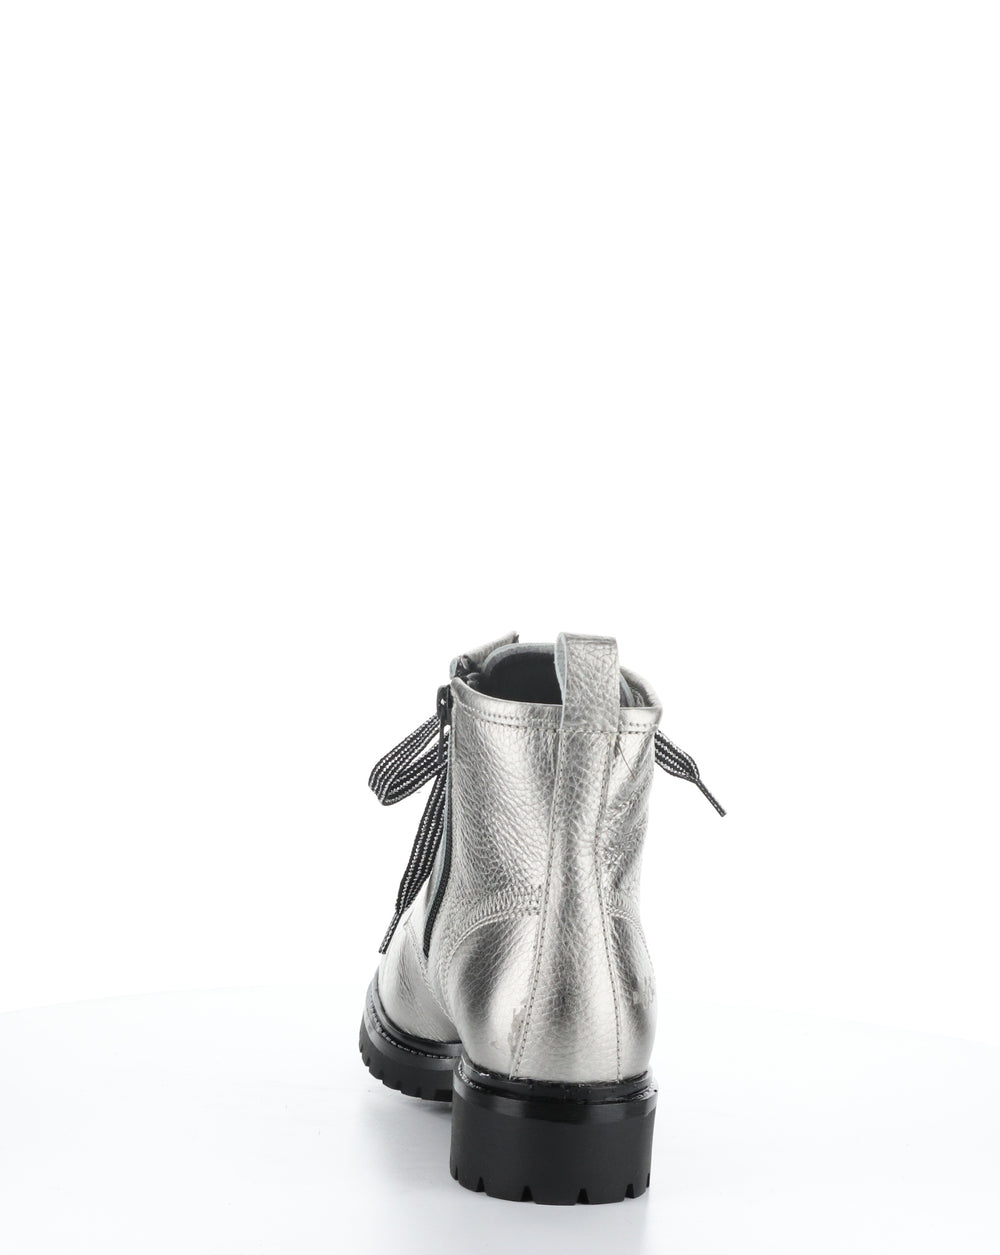 CARINAS PEWTER Round Toe Boots